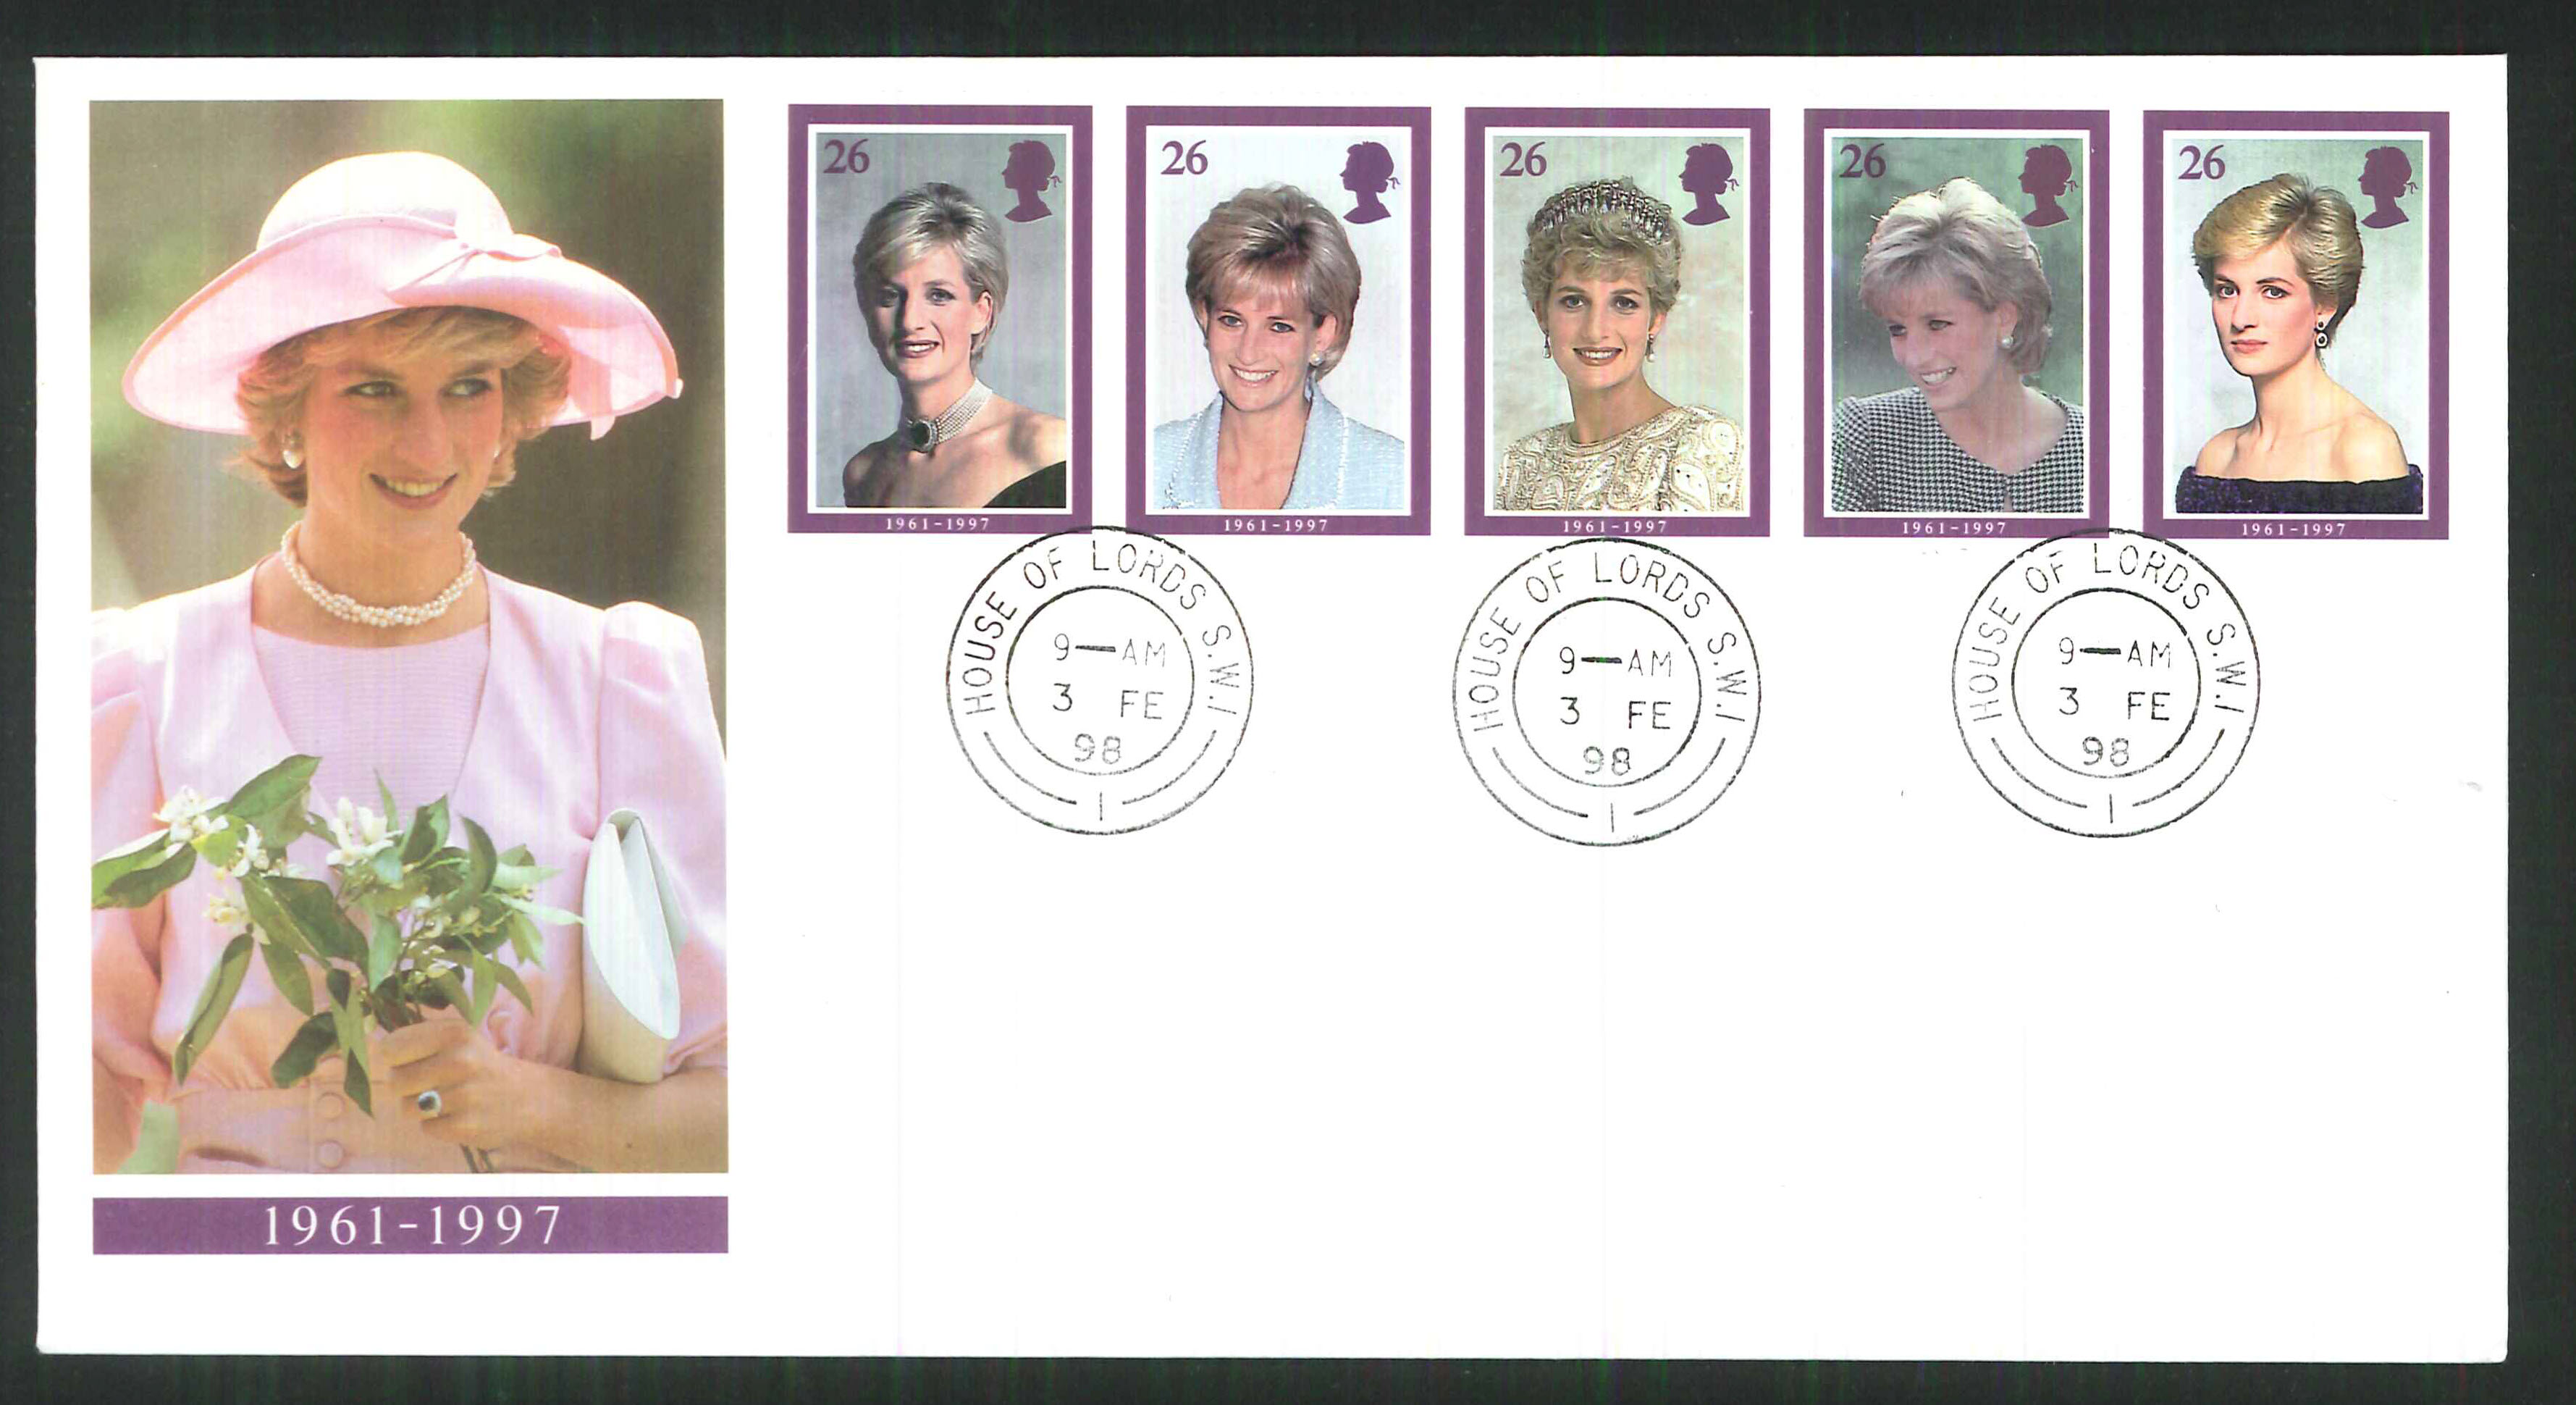 1998 - Diana Princess of Wales First Day Cover - House of Lords CDS Postmark